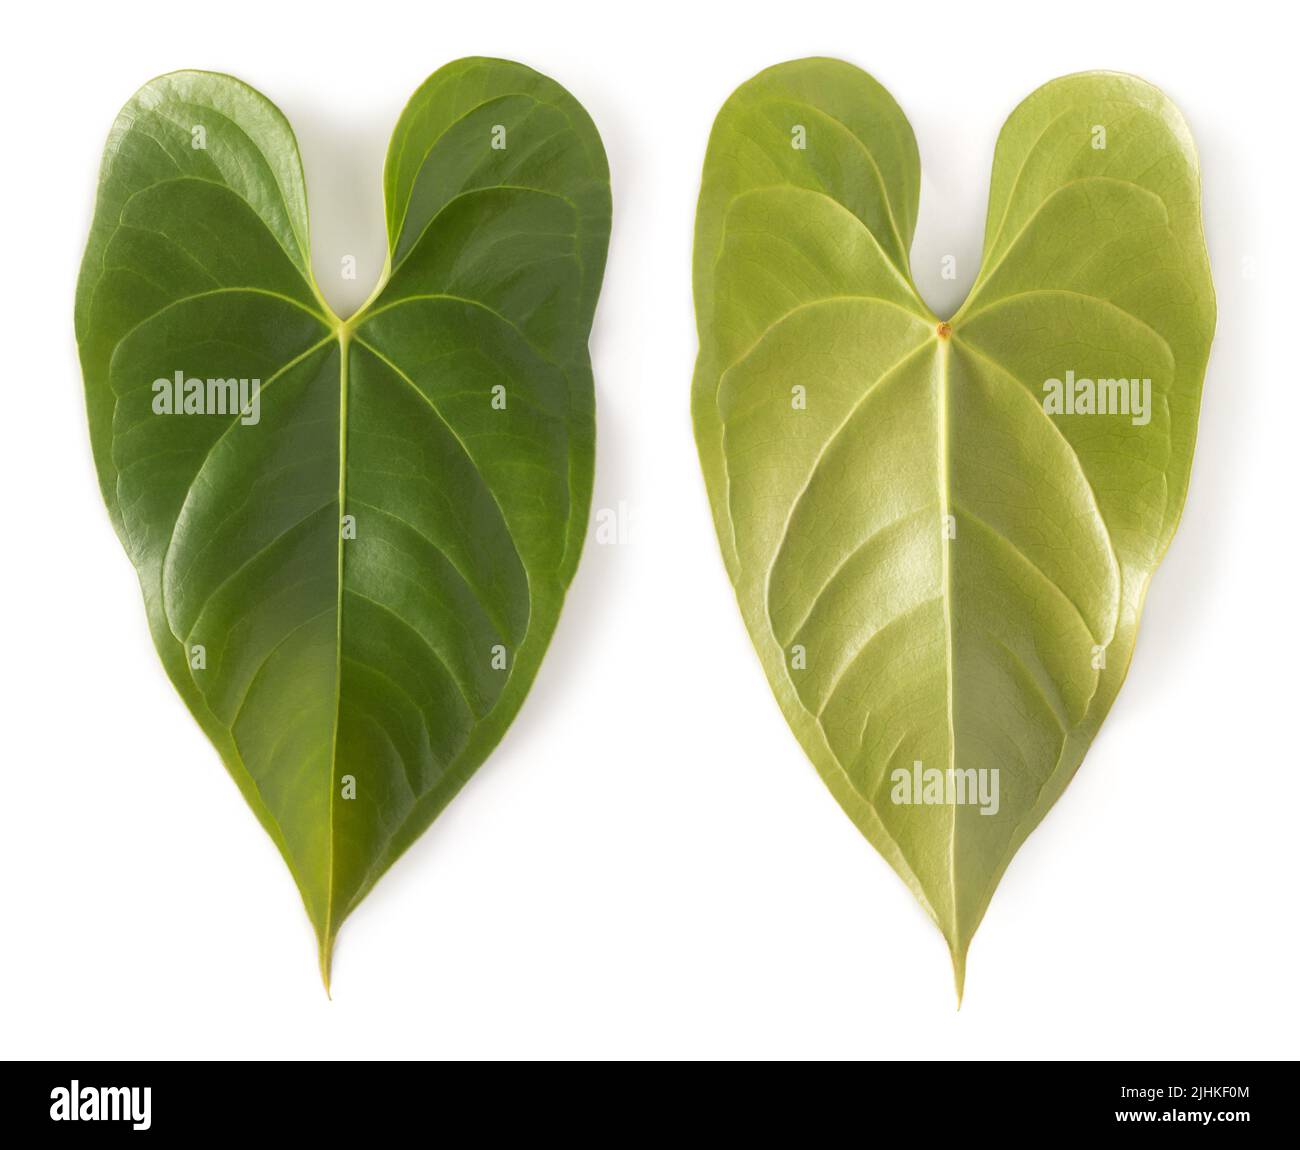 anthurium flowering plant leaves, also known as tailflower, flamingo and laceleaf plant, heart shaped foliage isolated on white background, collection Stock Photo